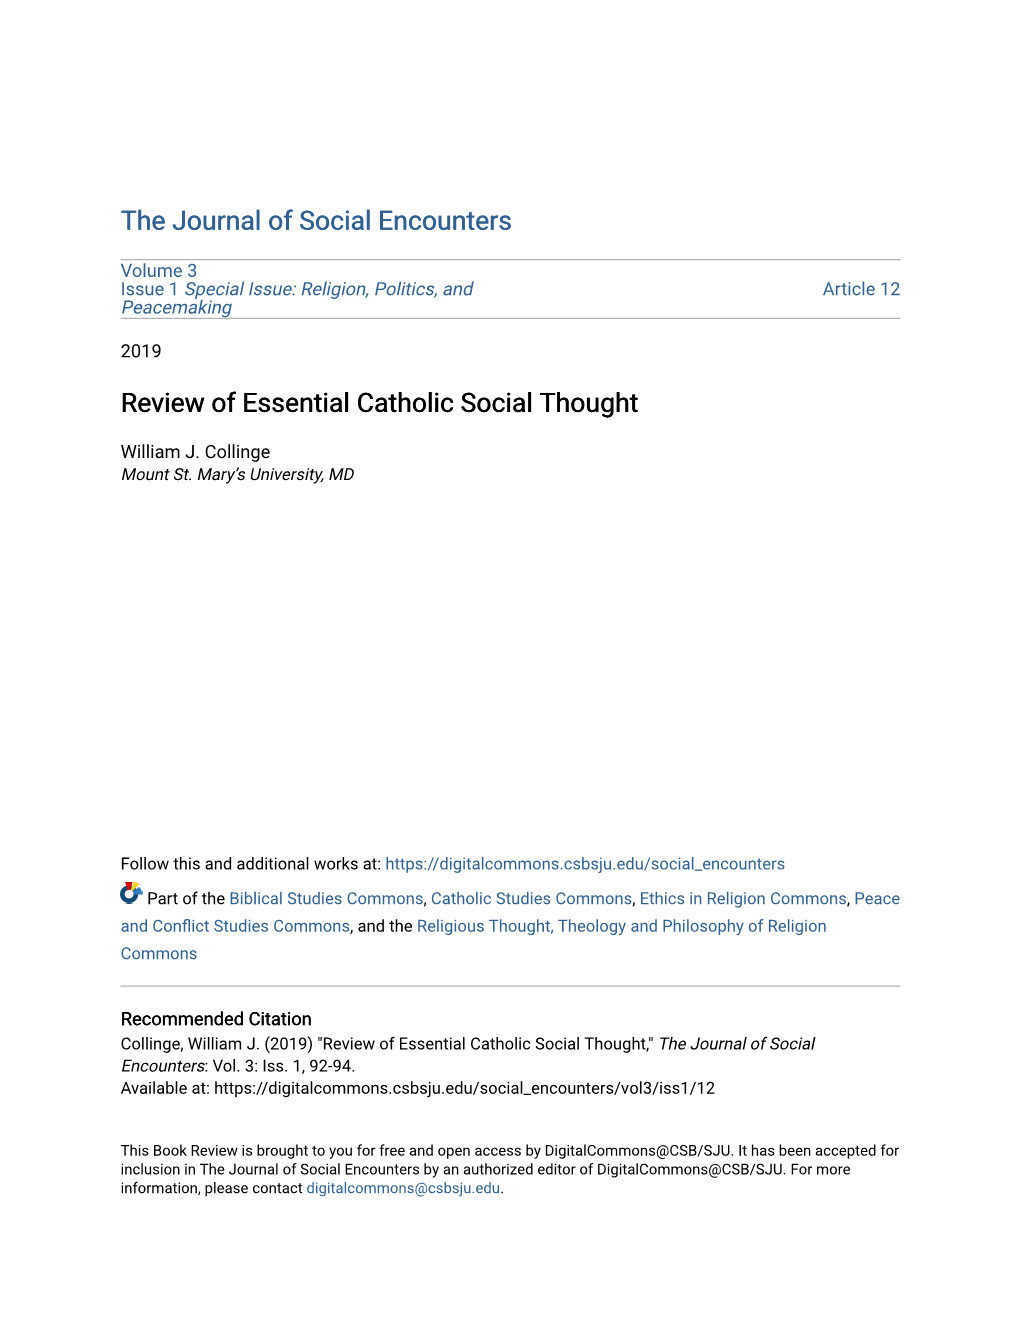 Review of Essential Catholic Social Thought